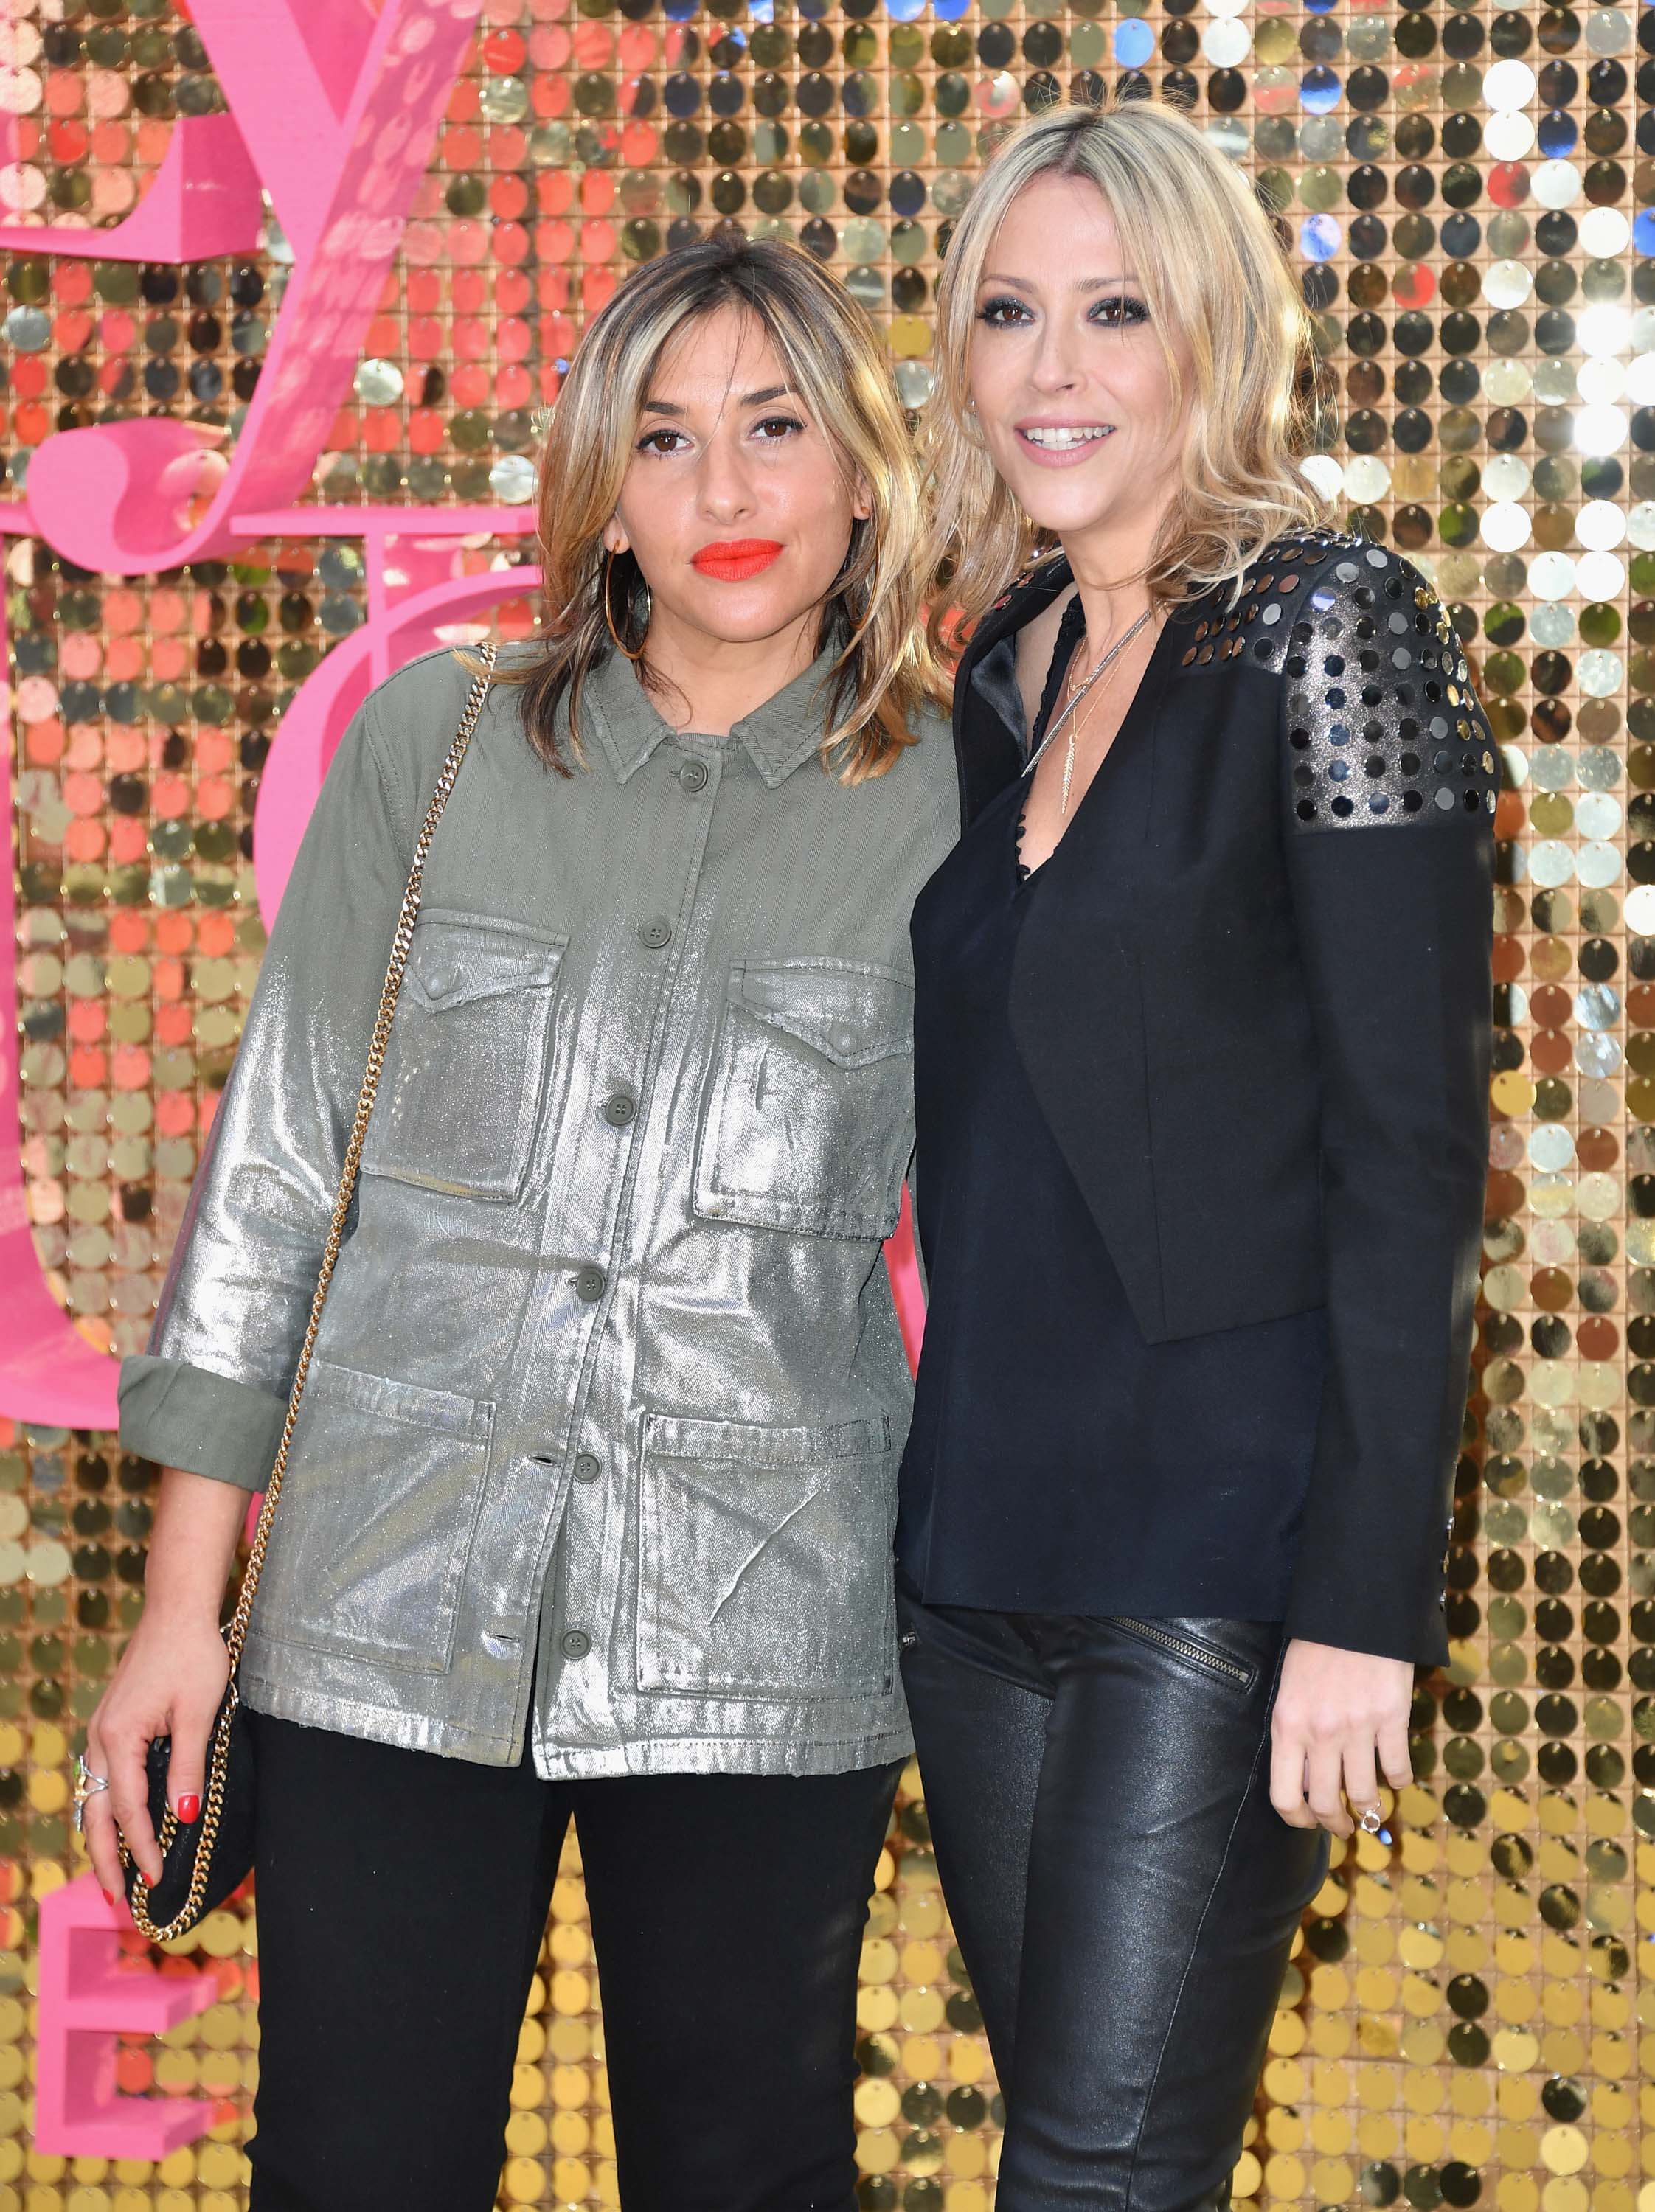 Nicole Appleton attends the party of Absolutely Fabulous The Movie